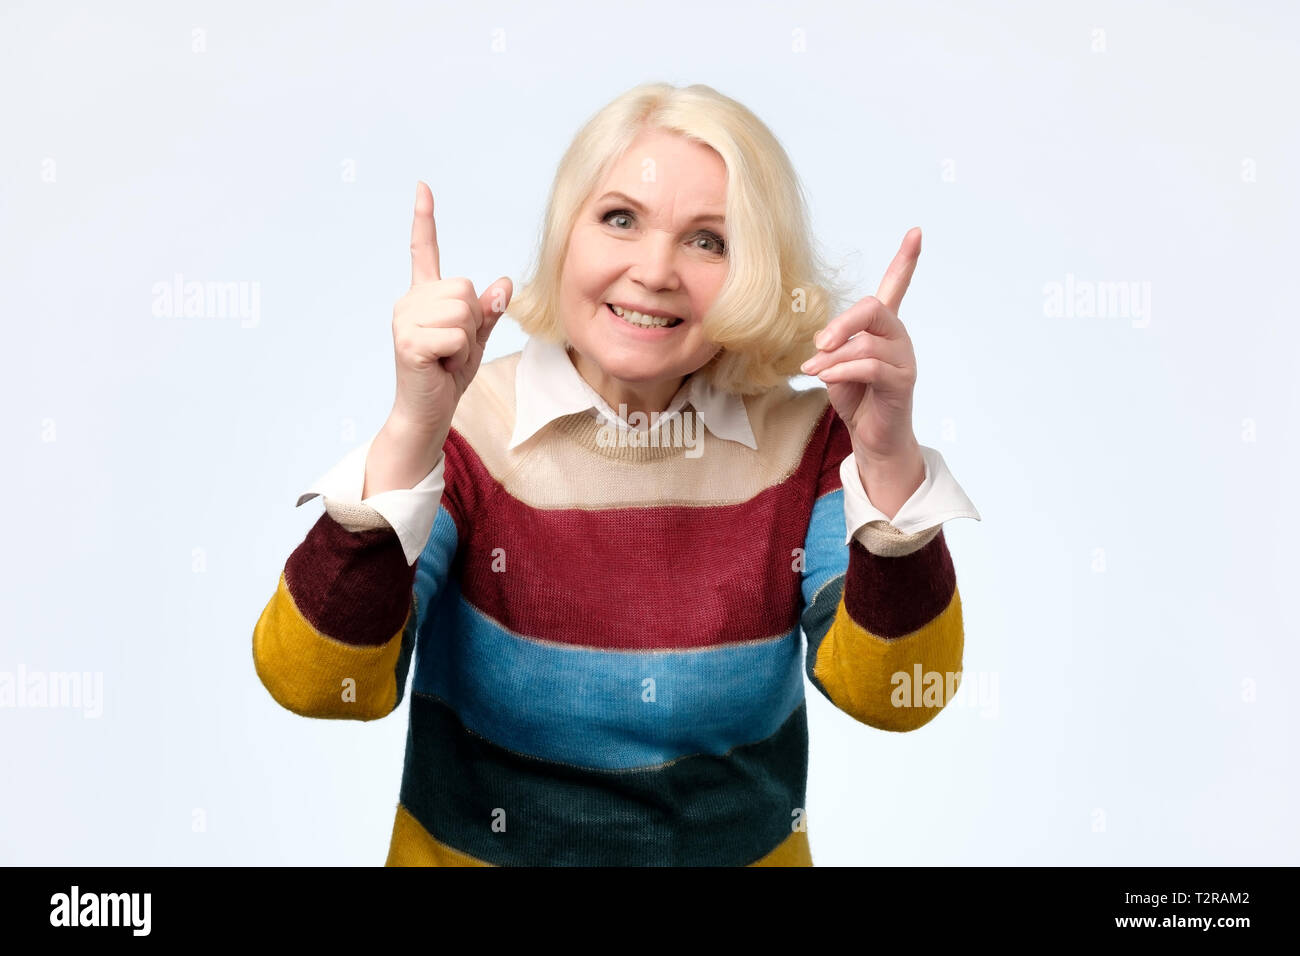 Pleased senior woman in yellow clothes warning you giving advice. Studio shot, isolated on gray background Stock Photo